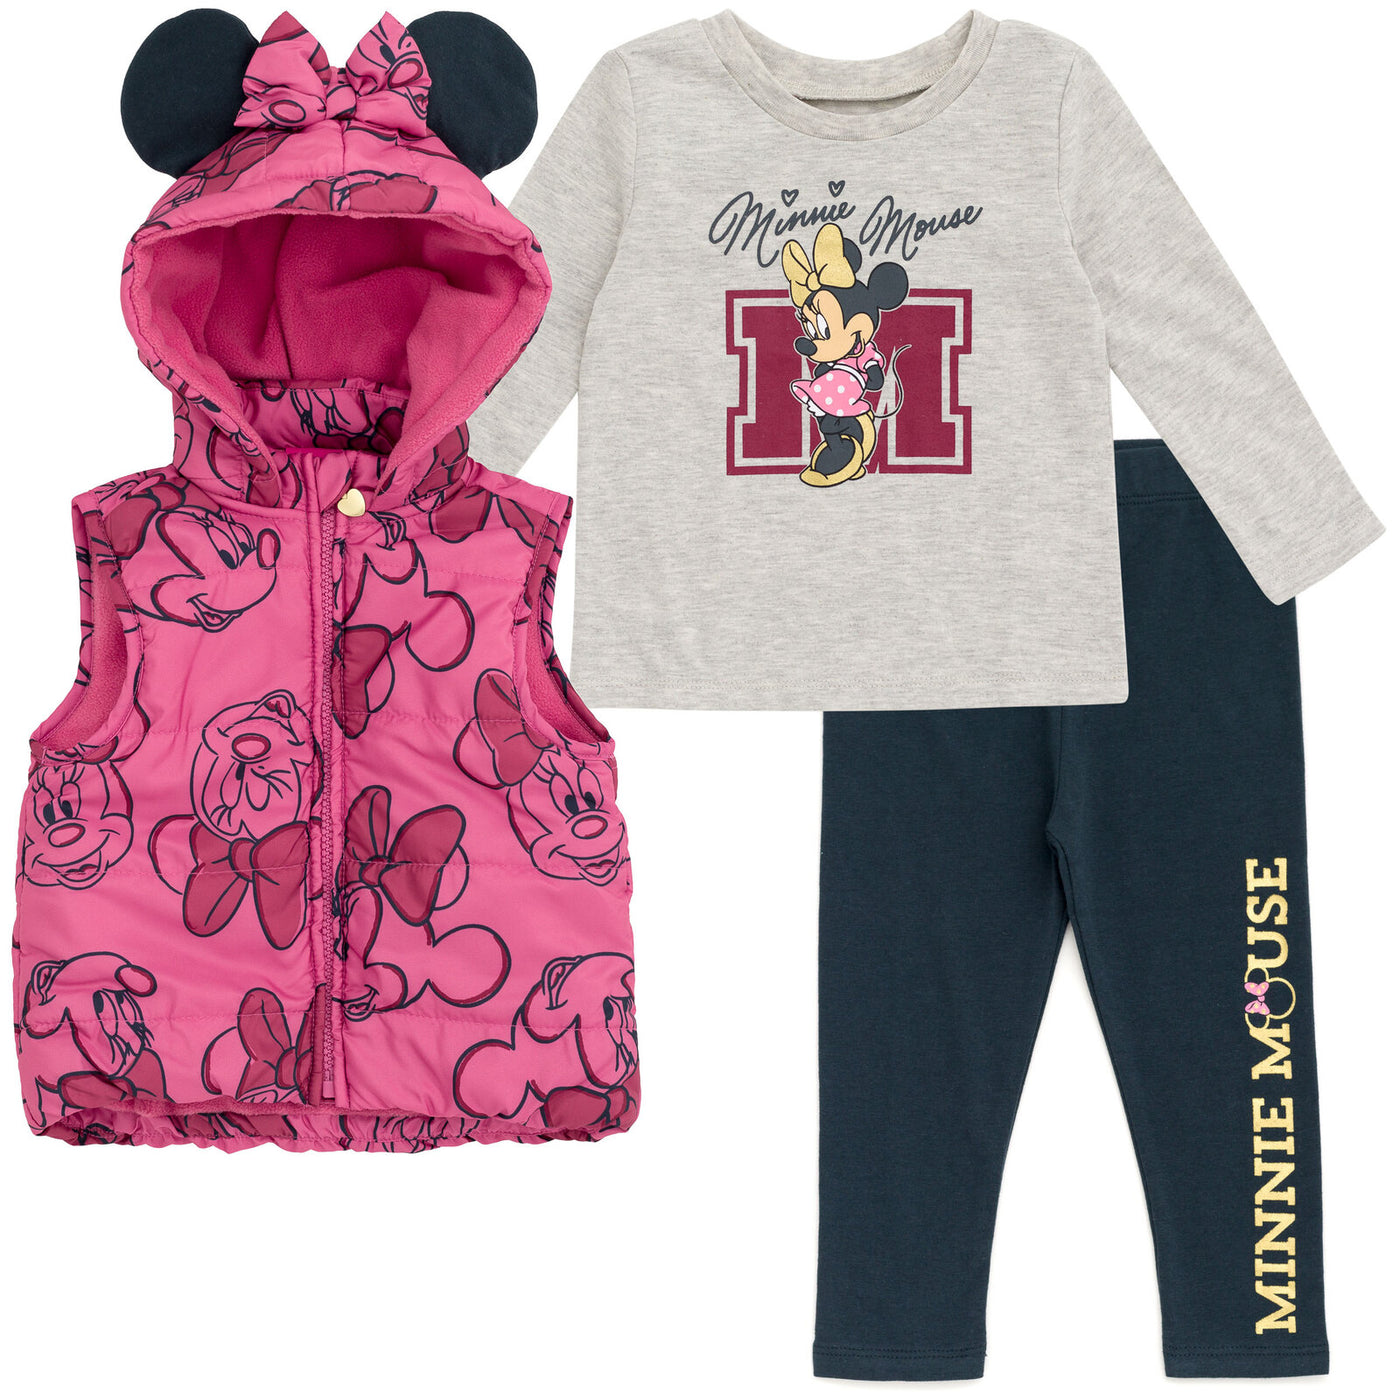 Minnie Mouse Zip Up Vest Puffer T-Shirt and Leggings 3 Piece Outfit Set